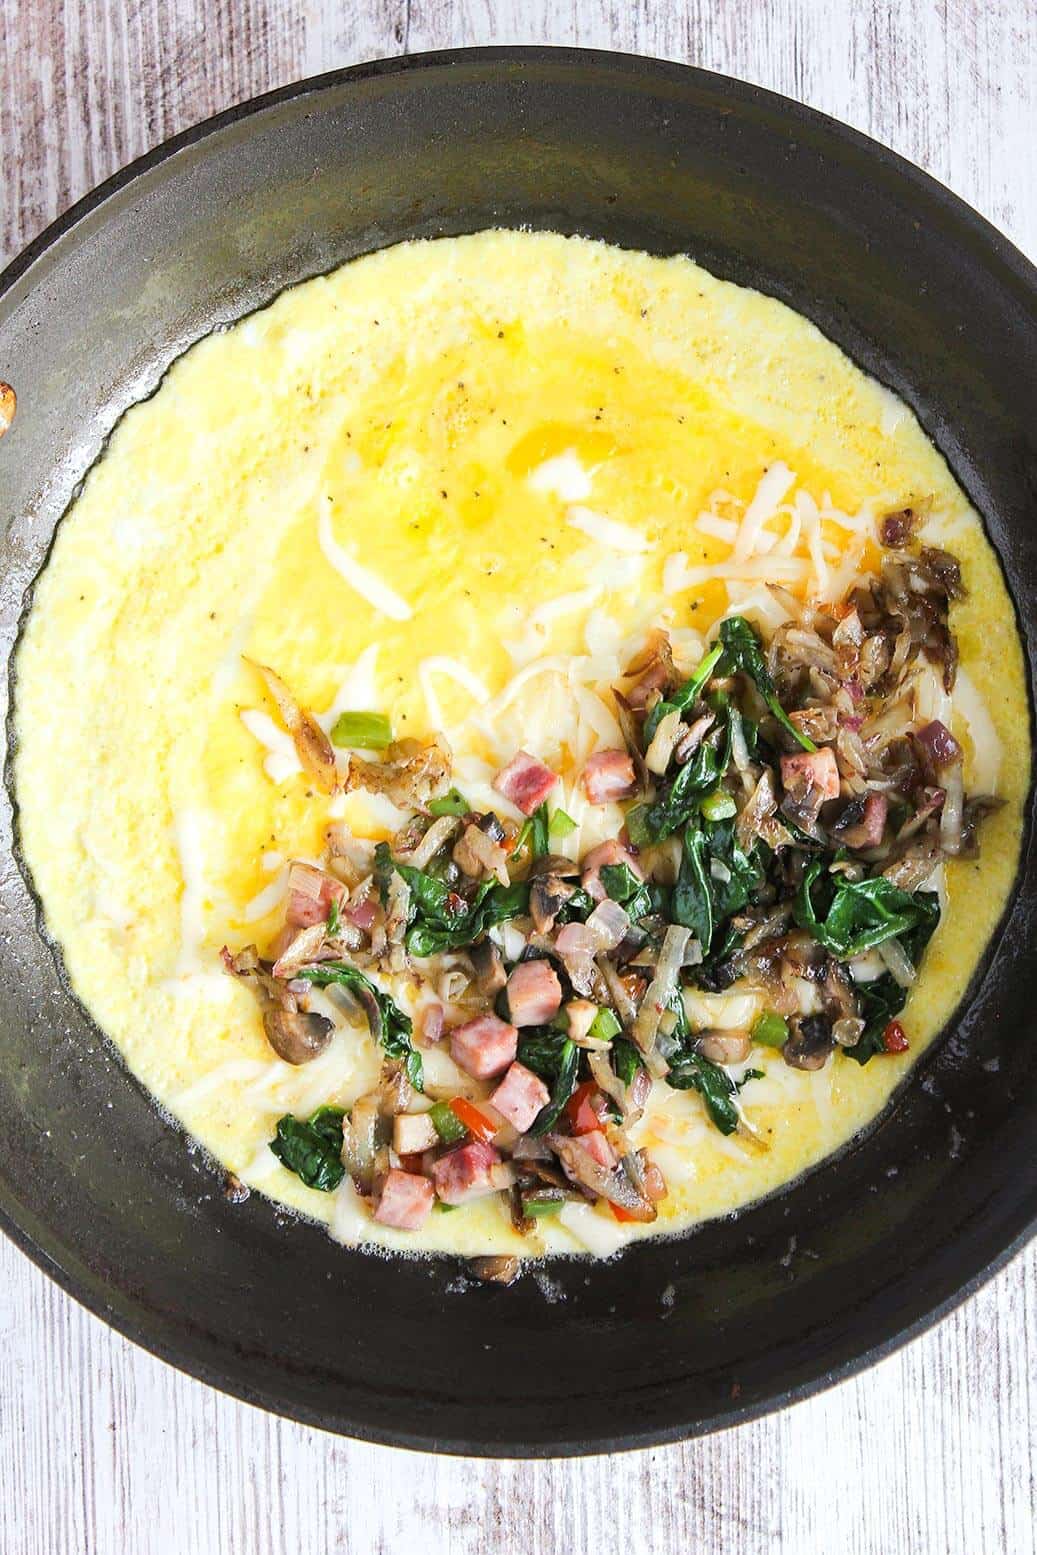 Eggs layered with cheese, veggies, and ham in a skillet.